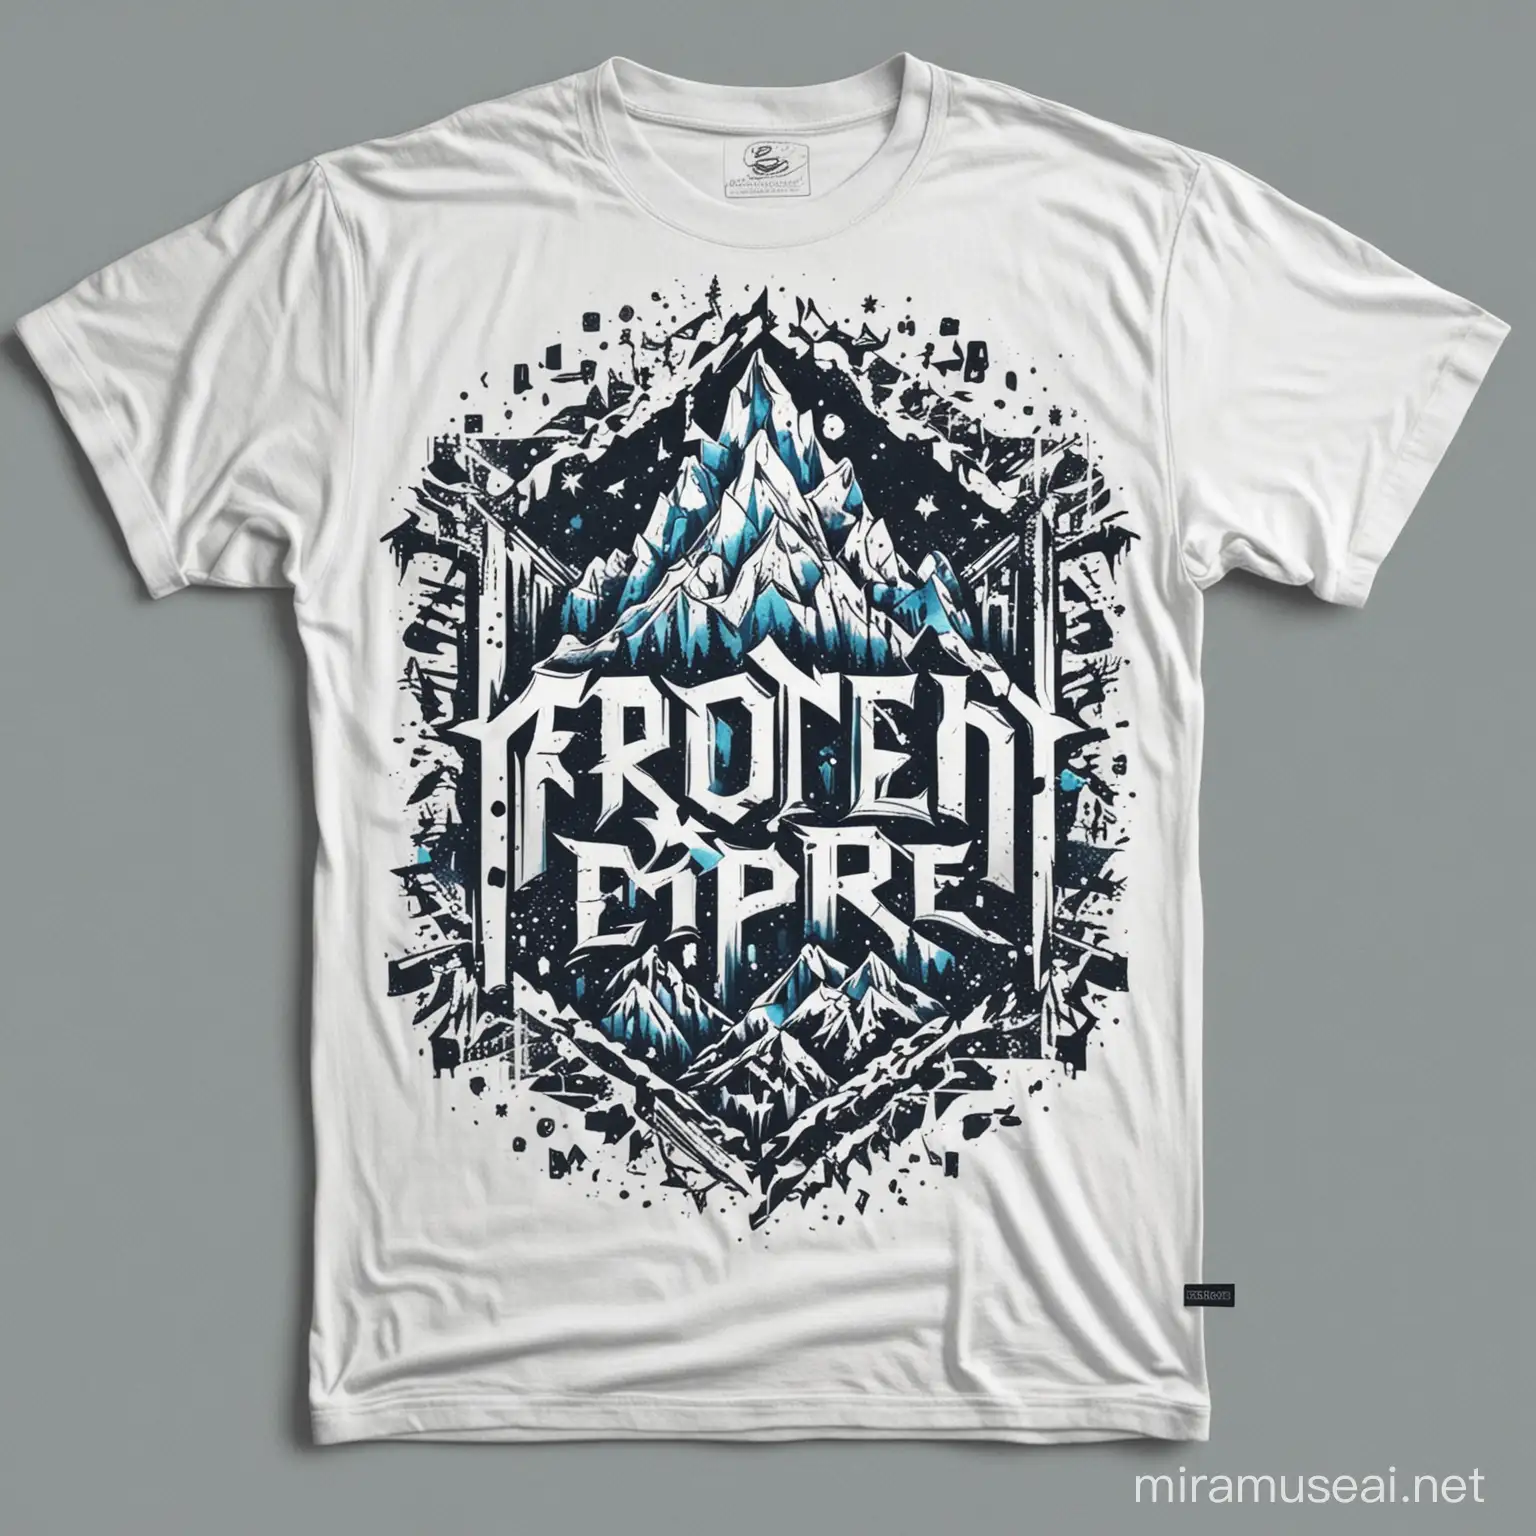 "Let It Go: Frozen Empire Edition" streetwear style t shirt design .The key element I want to incorporate into these designs are illustrations. They must be cool, unique and targeted towards the youth culture who patronizes streetwear., illustration, typography